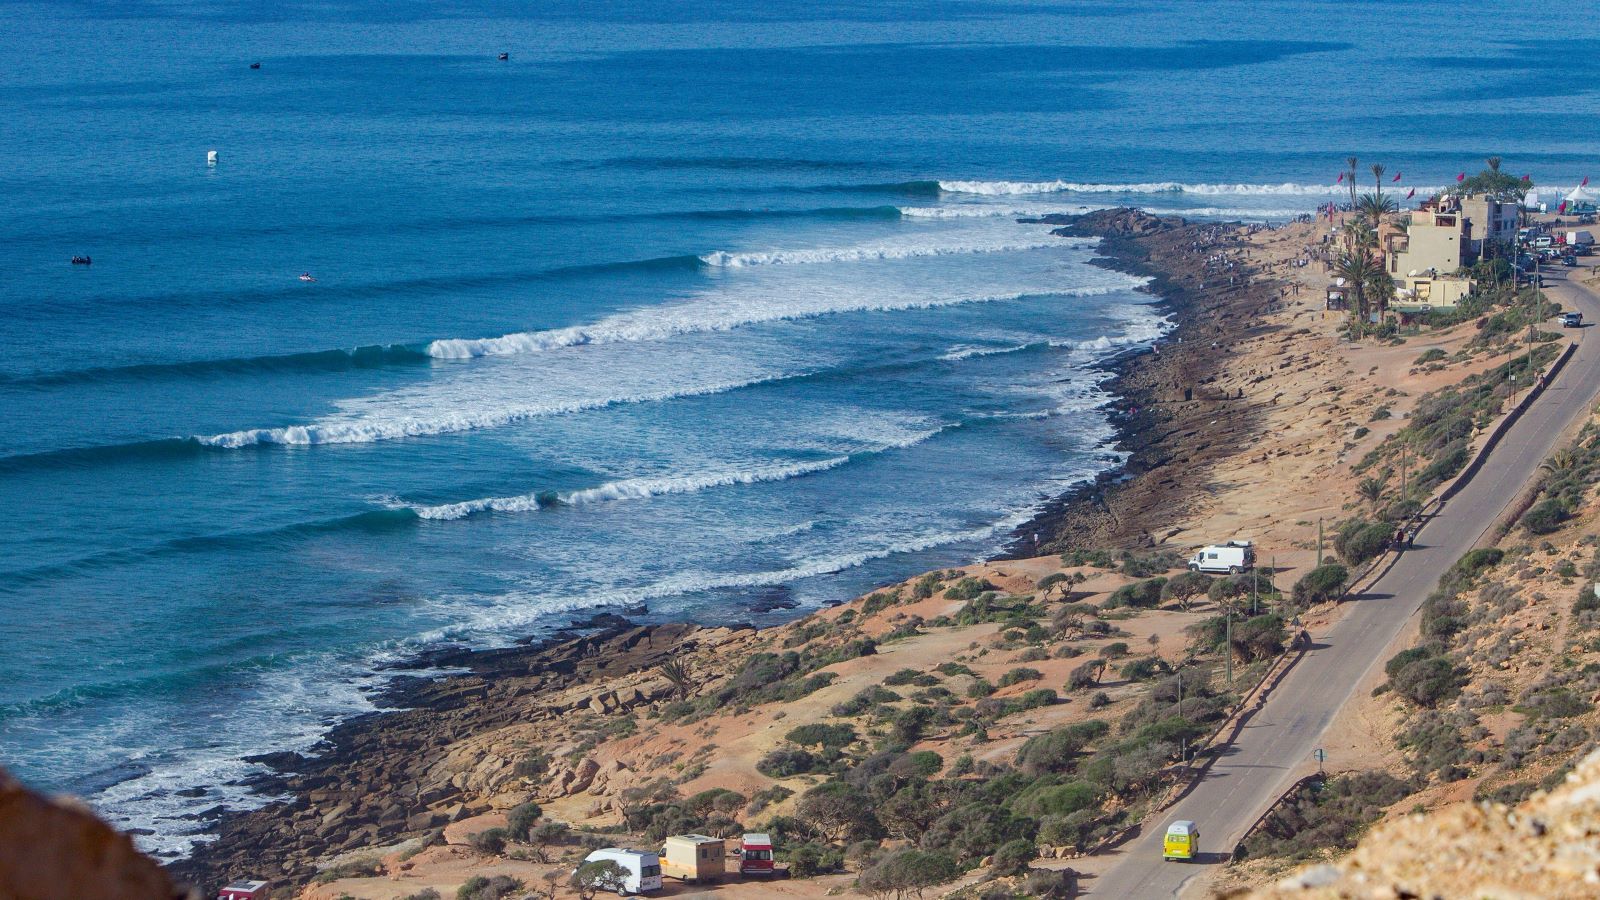 Pic_ The European QS will be back at the iconic Anchor Point in early 2023. Credit_ WSL _ Masurel